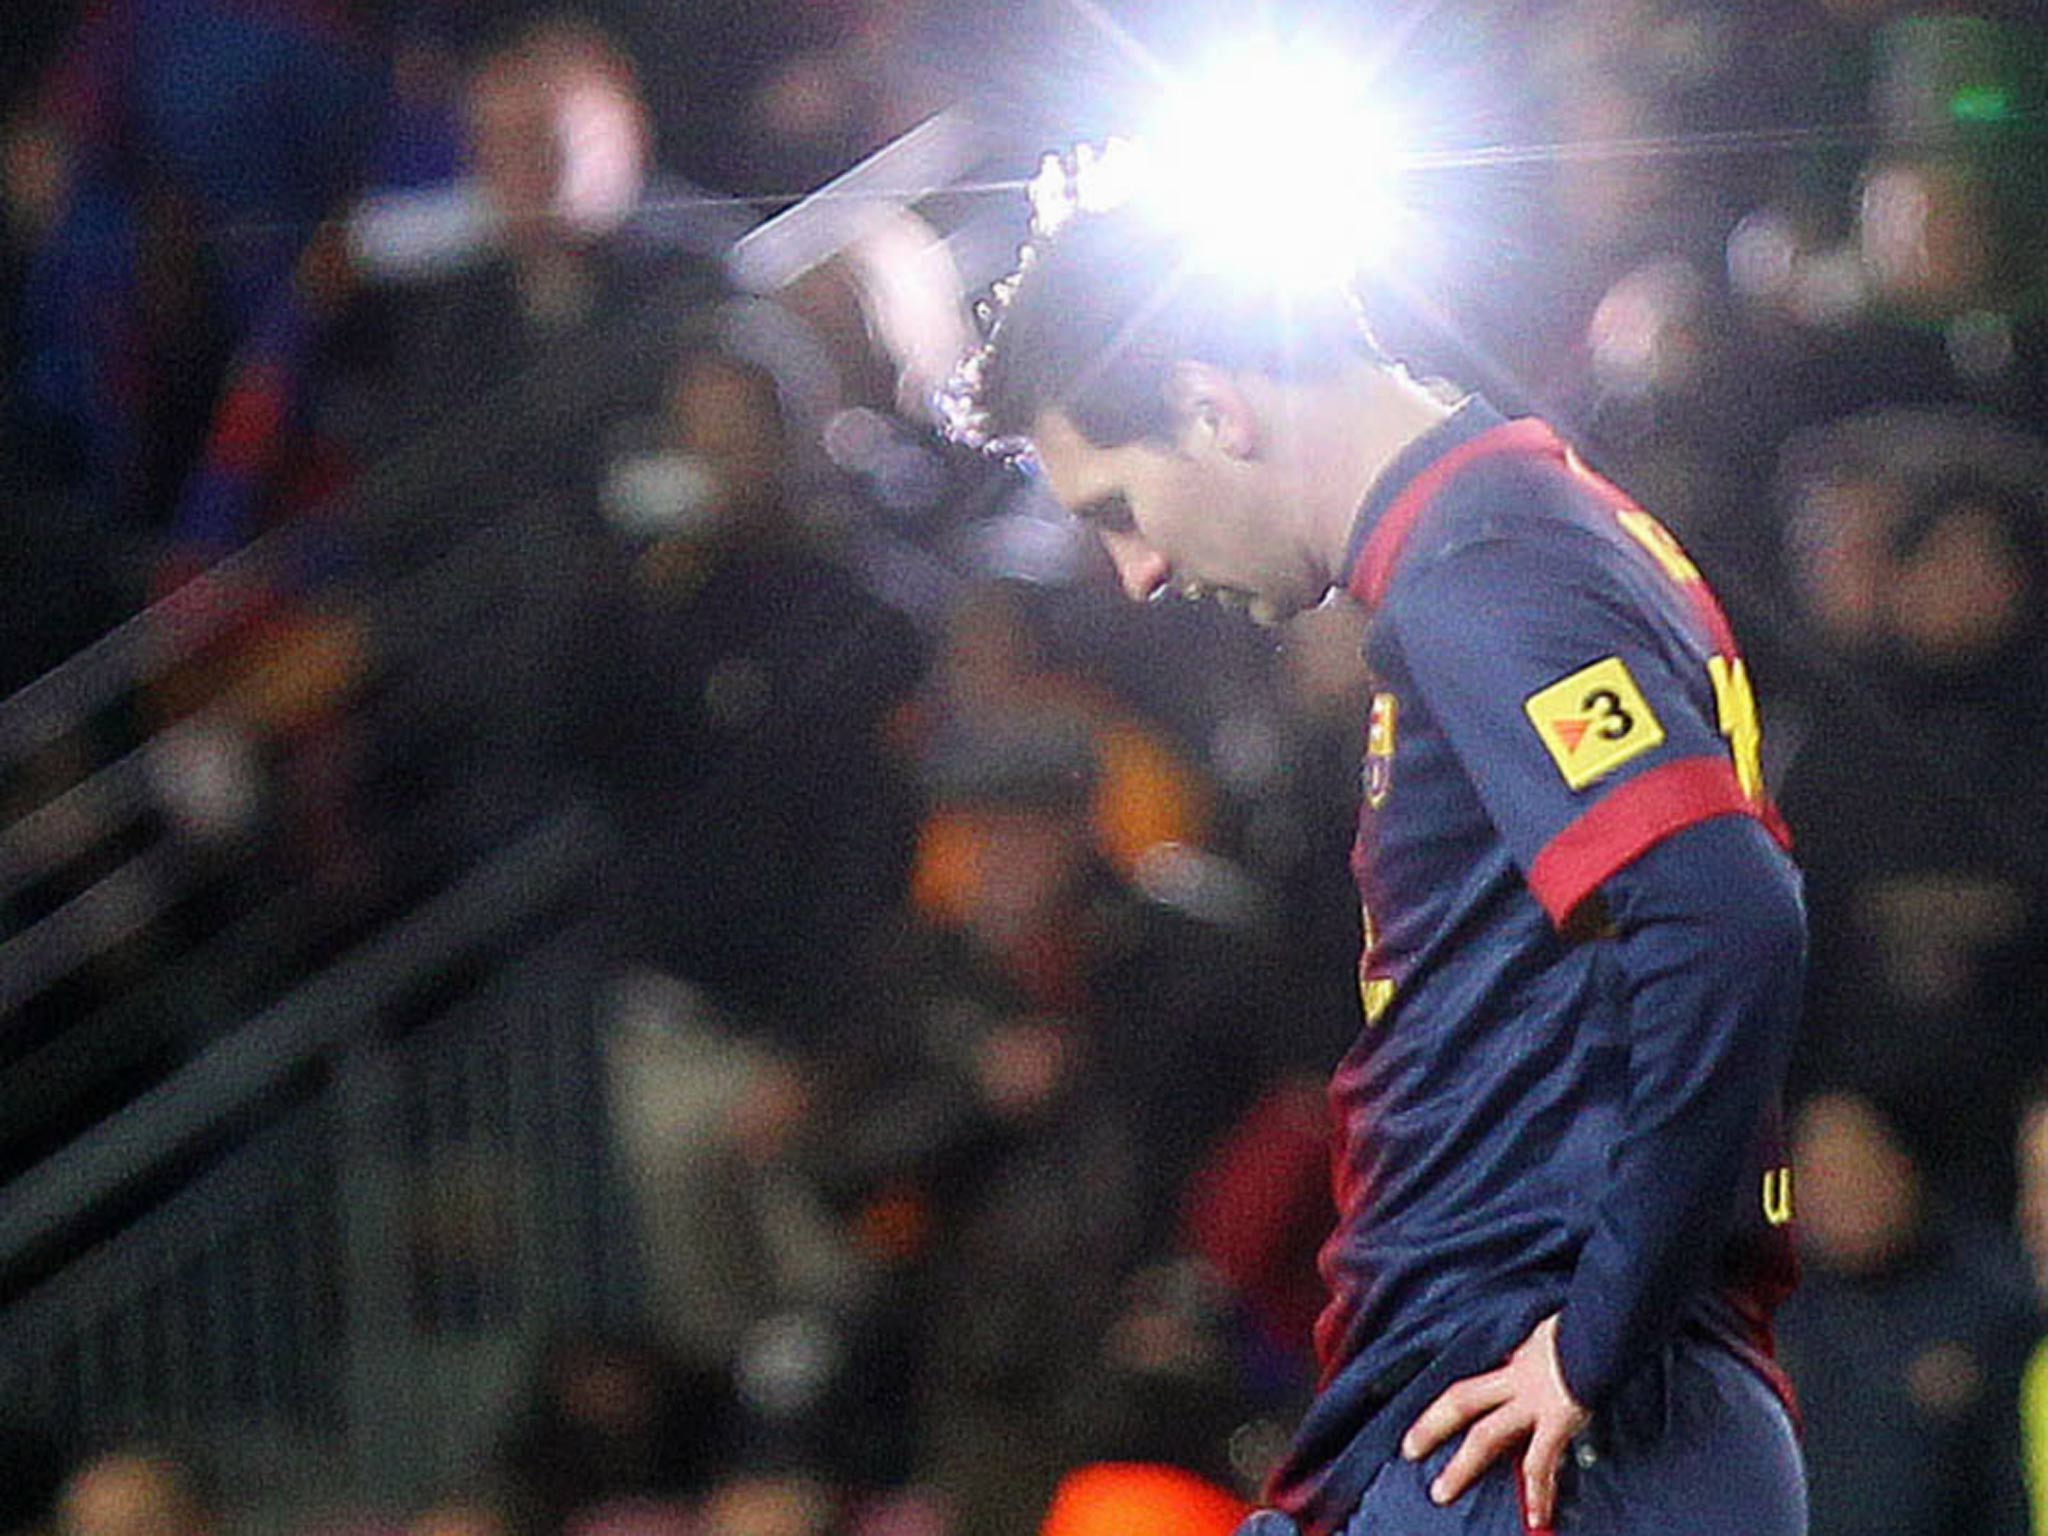 Lionel Messi pictured in the Copa del Rey defeat to Real Madrid